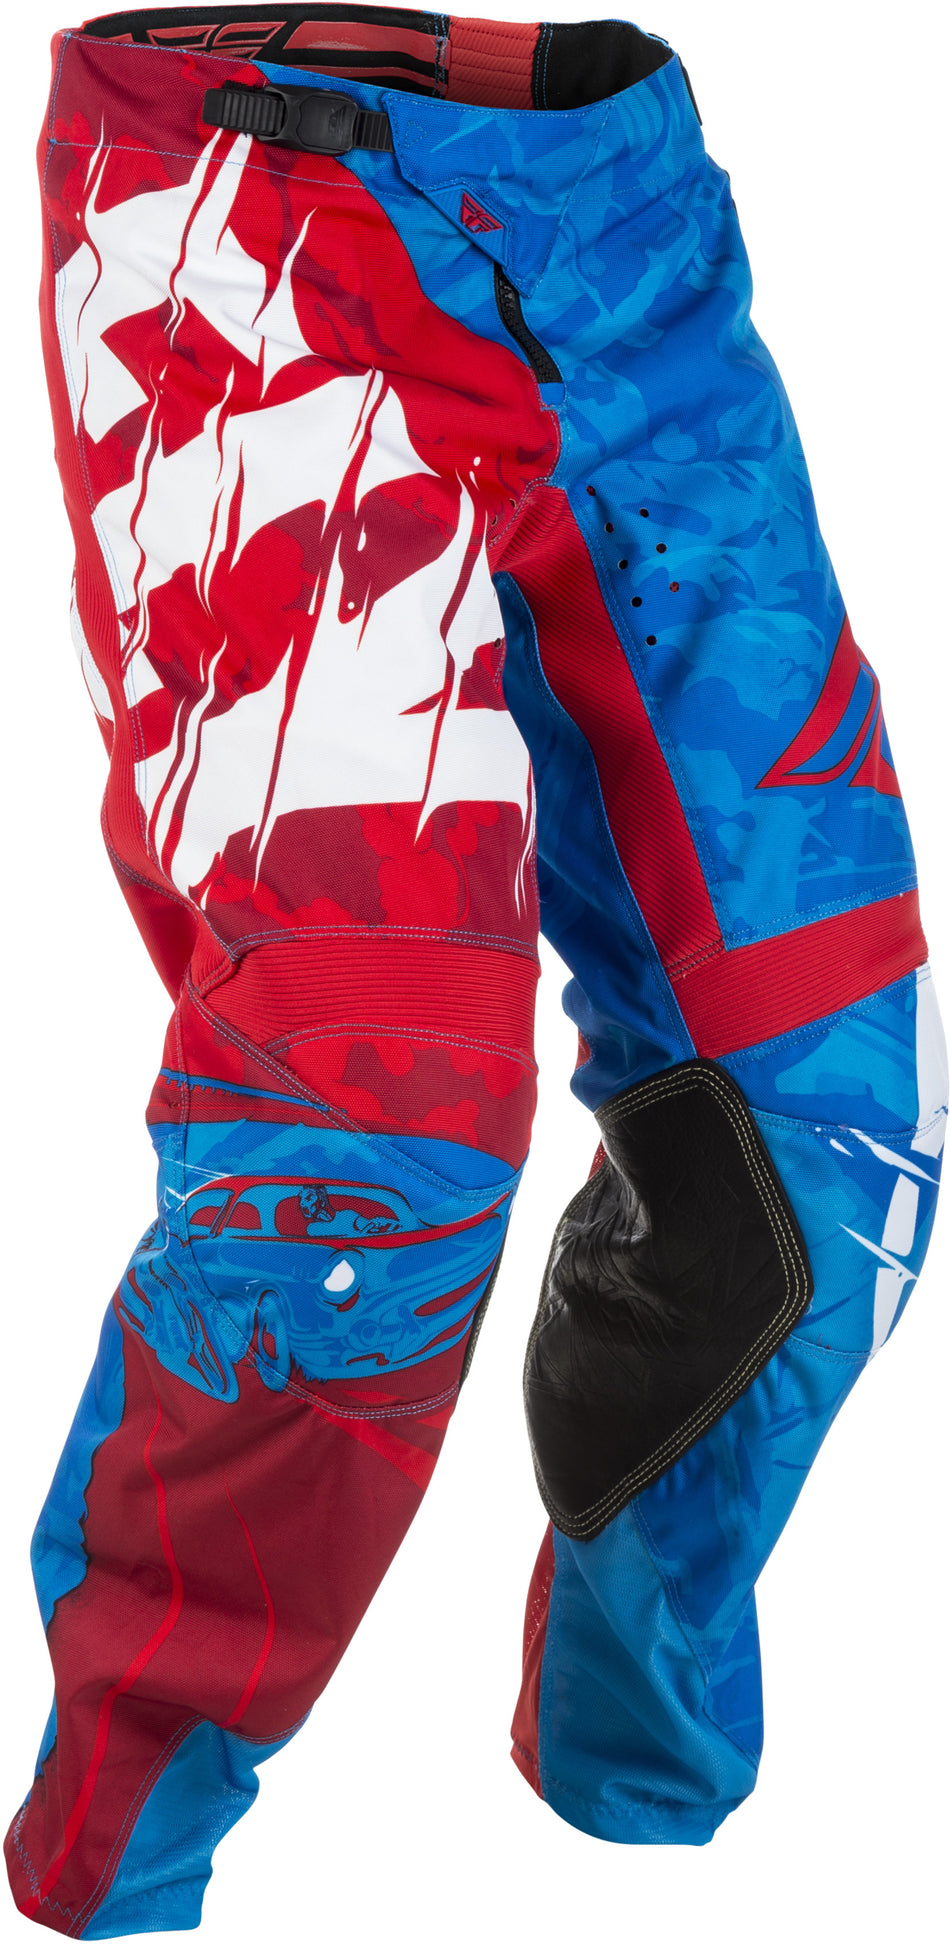 FLY RACING Kinetic Outlaw Pants Red/Blue Sz 38 371-53238